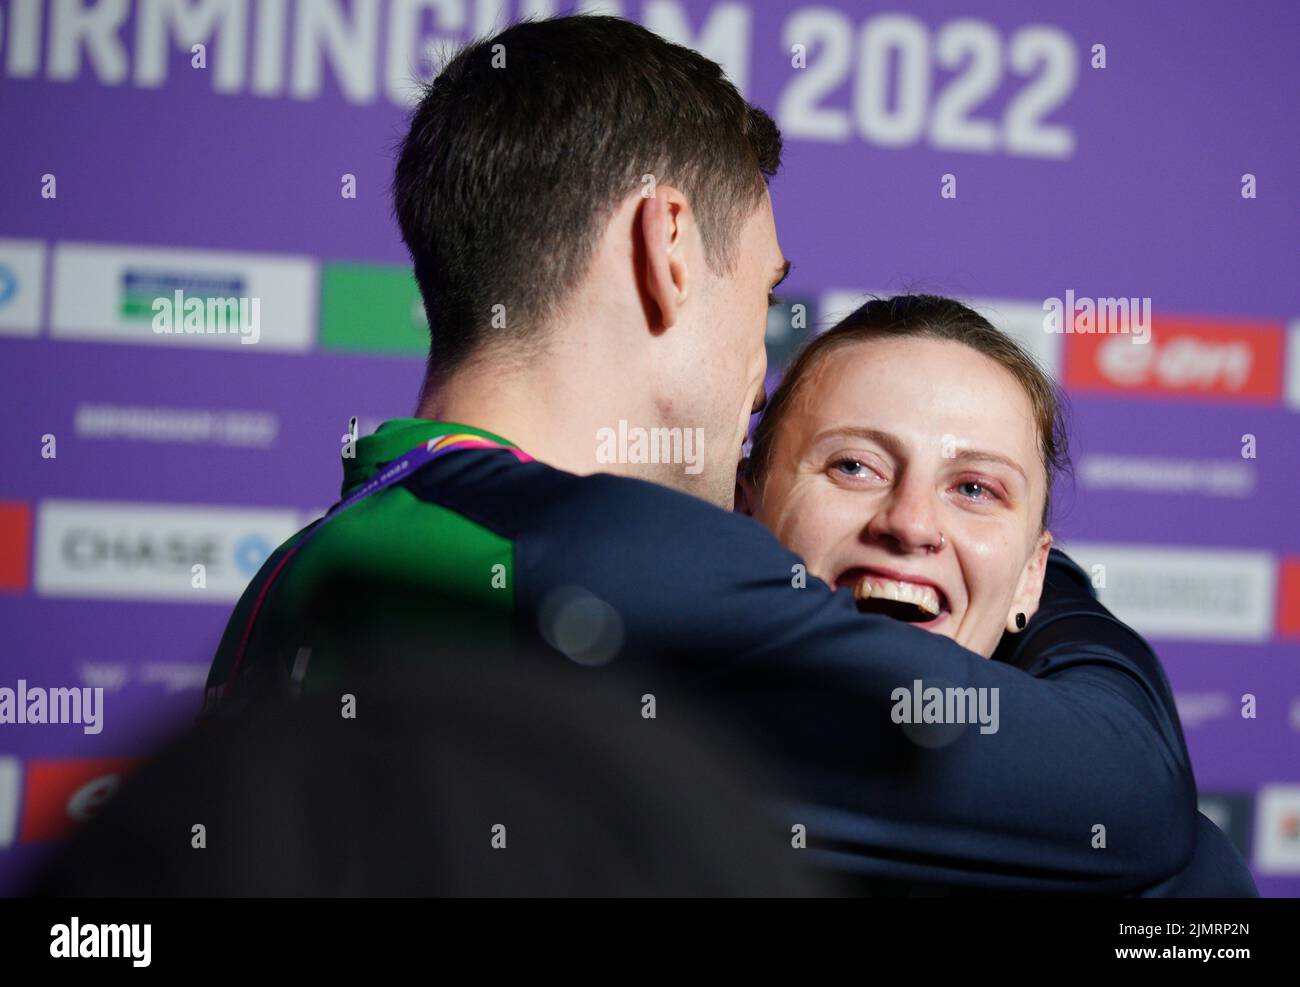 Northern Ireland's Aidan Walsh (left) and his sister Michaela Walsh celebrate after winning gold medals in their respective matches at The NEC on day ten of the 2022 Commonwealth Games in Birmingham. Picture date: Sunday August 7, 2022. Stock Photo